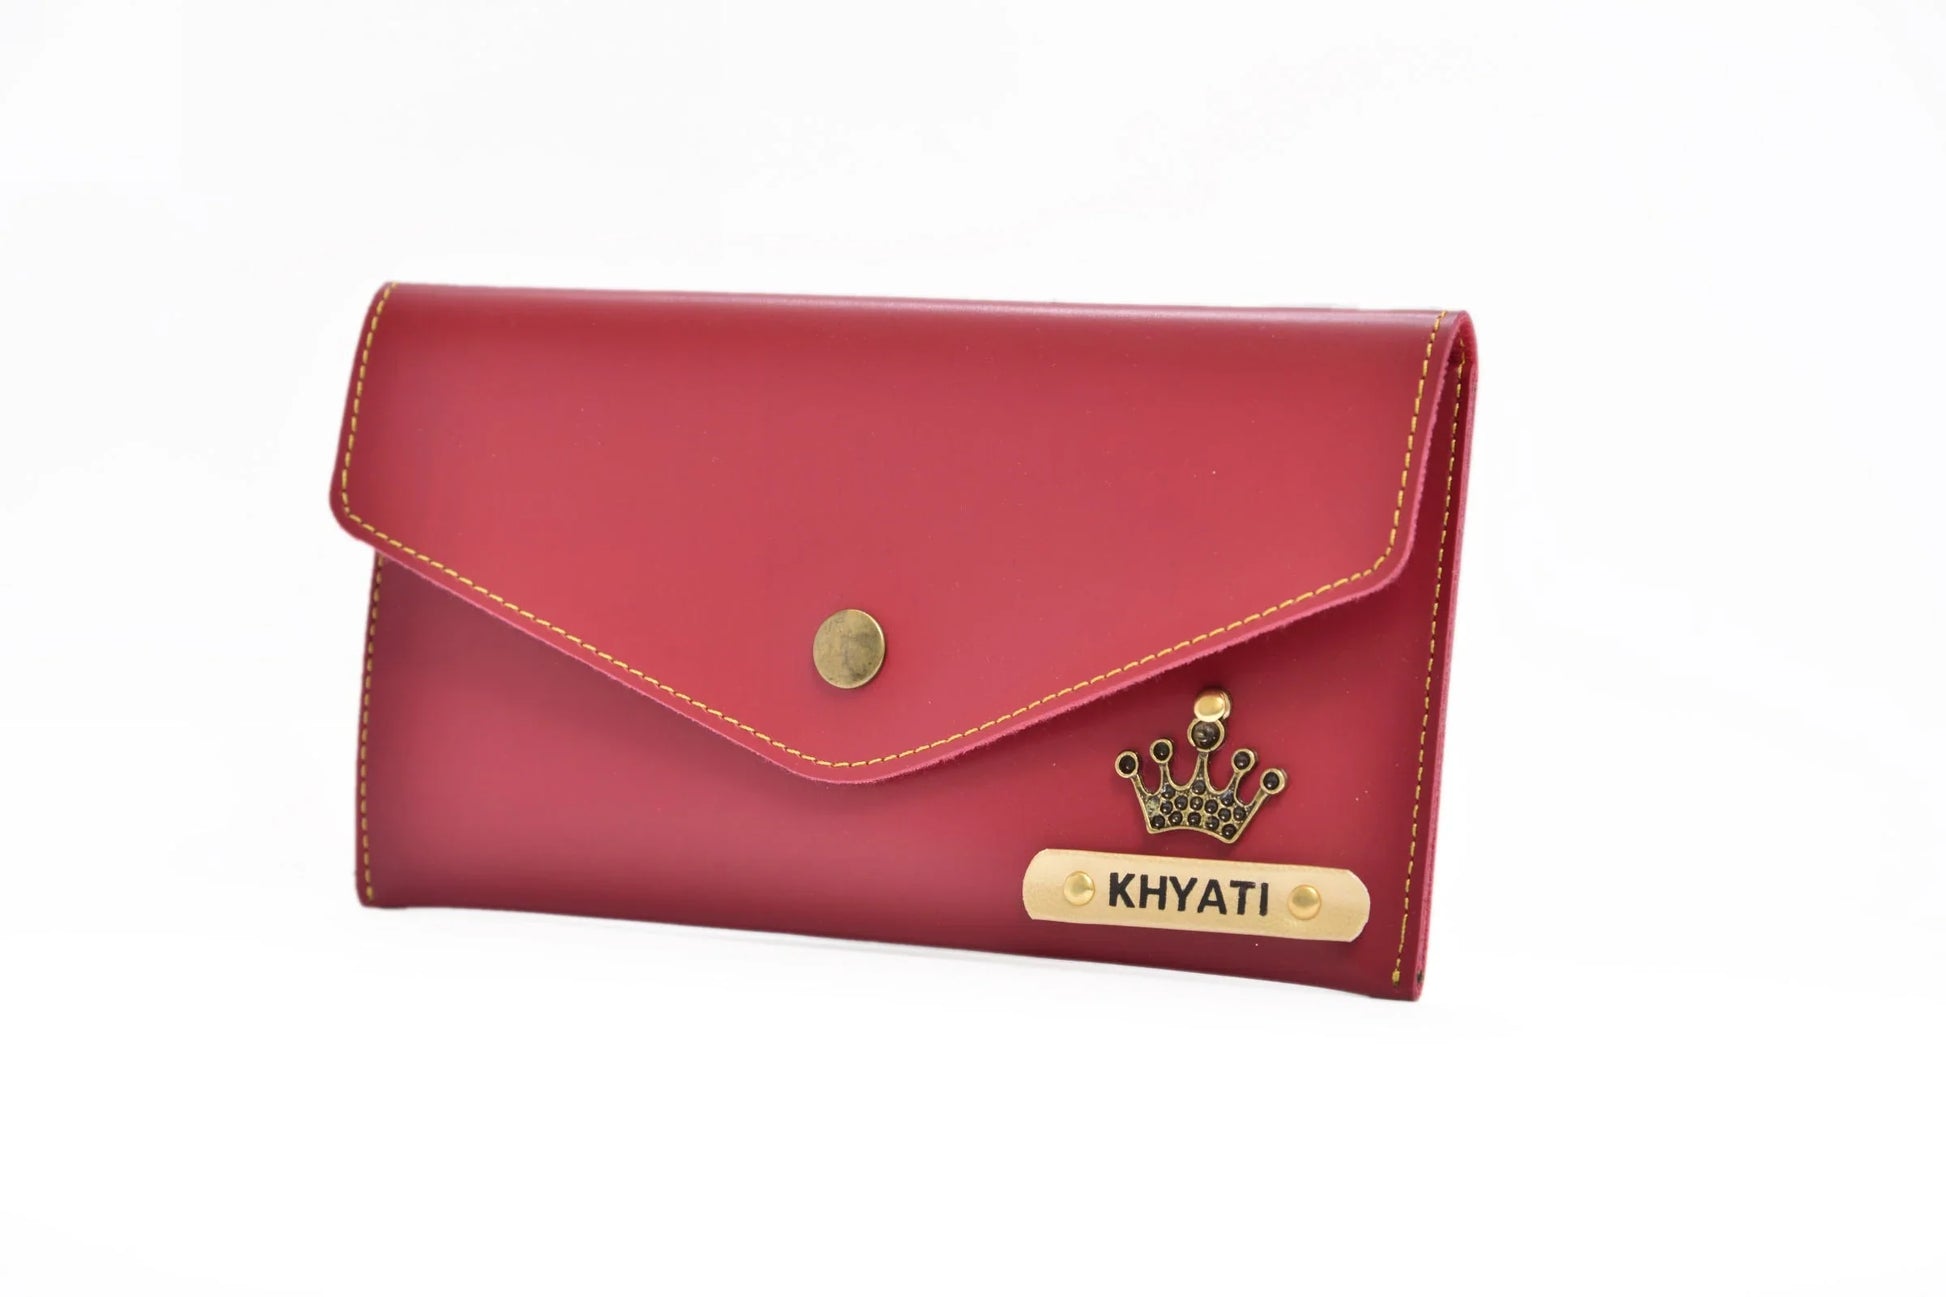 With its sleek and sophisticated design, this personalized leather clutch is a must-have for any fashion-forward woman. Personalize it with your name or initials for an extra touch of luxury.